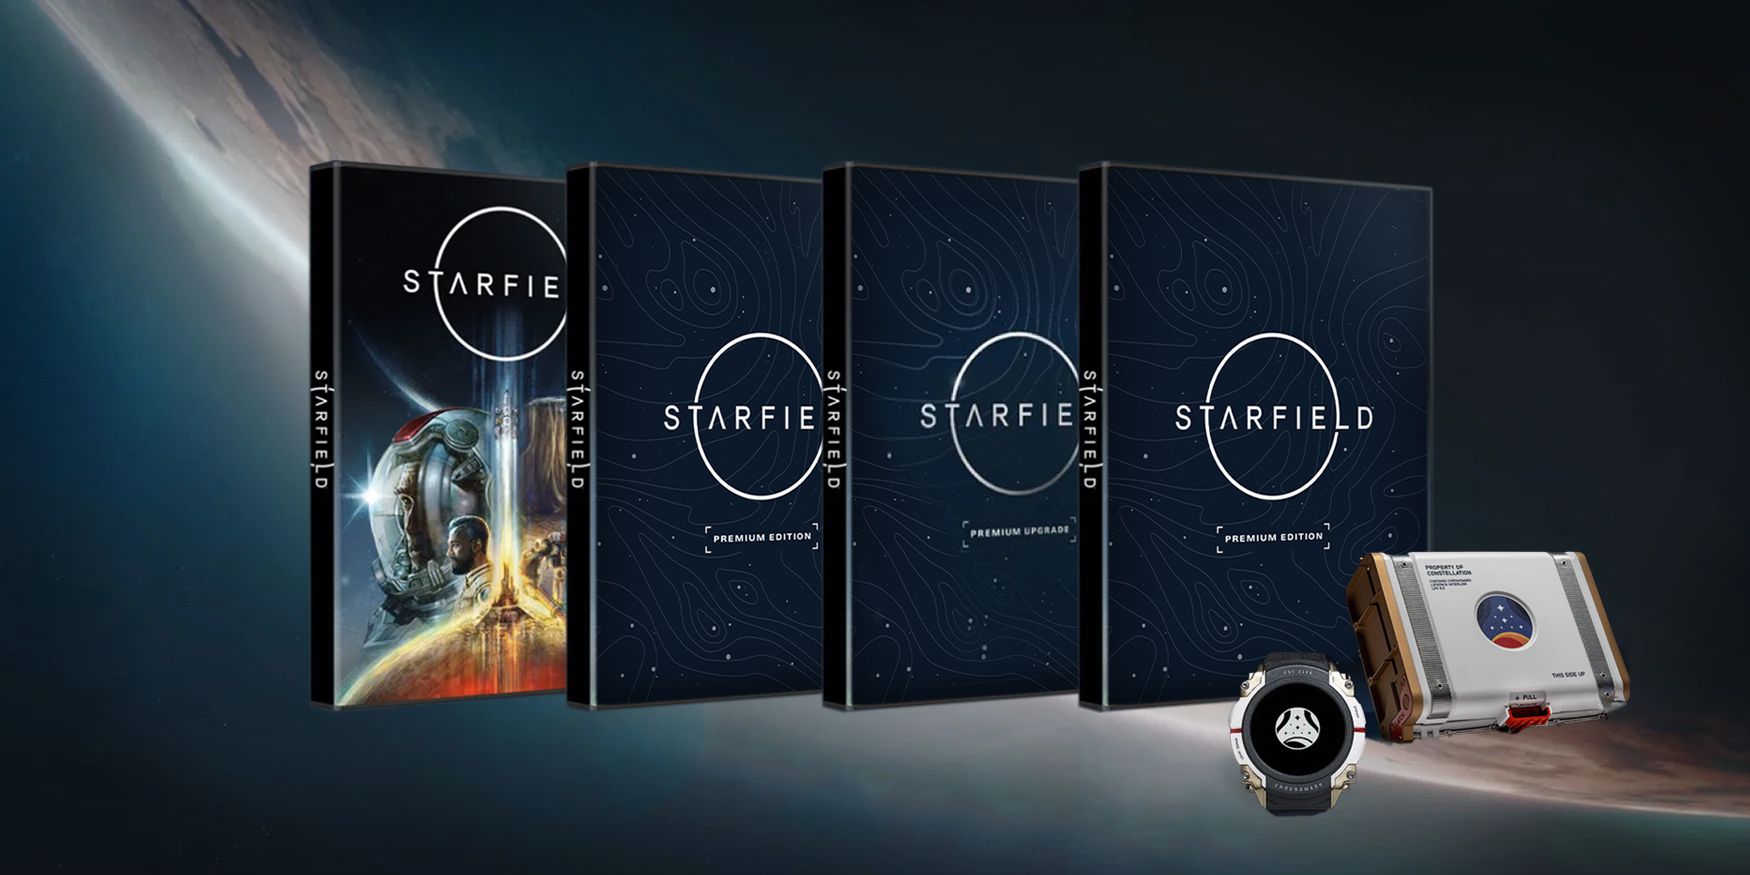 UPDATE: Bethesda Confirms Starfield Physical Standard Editions